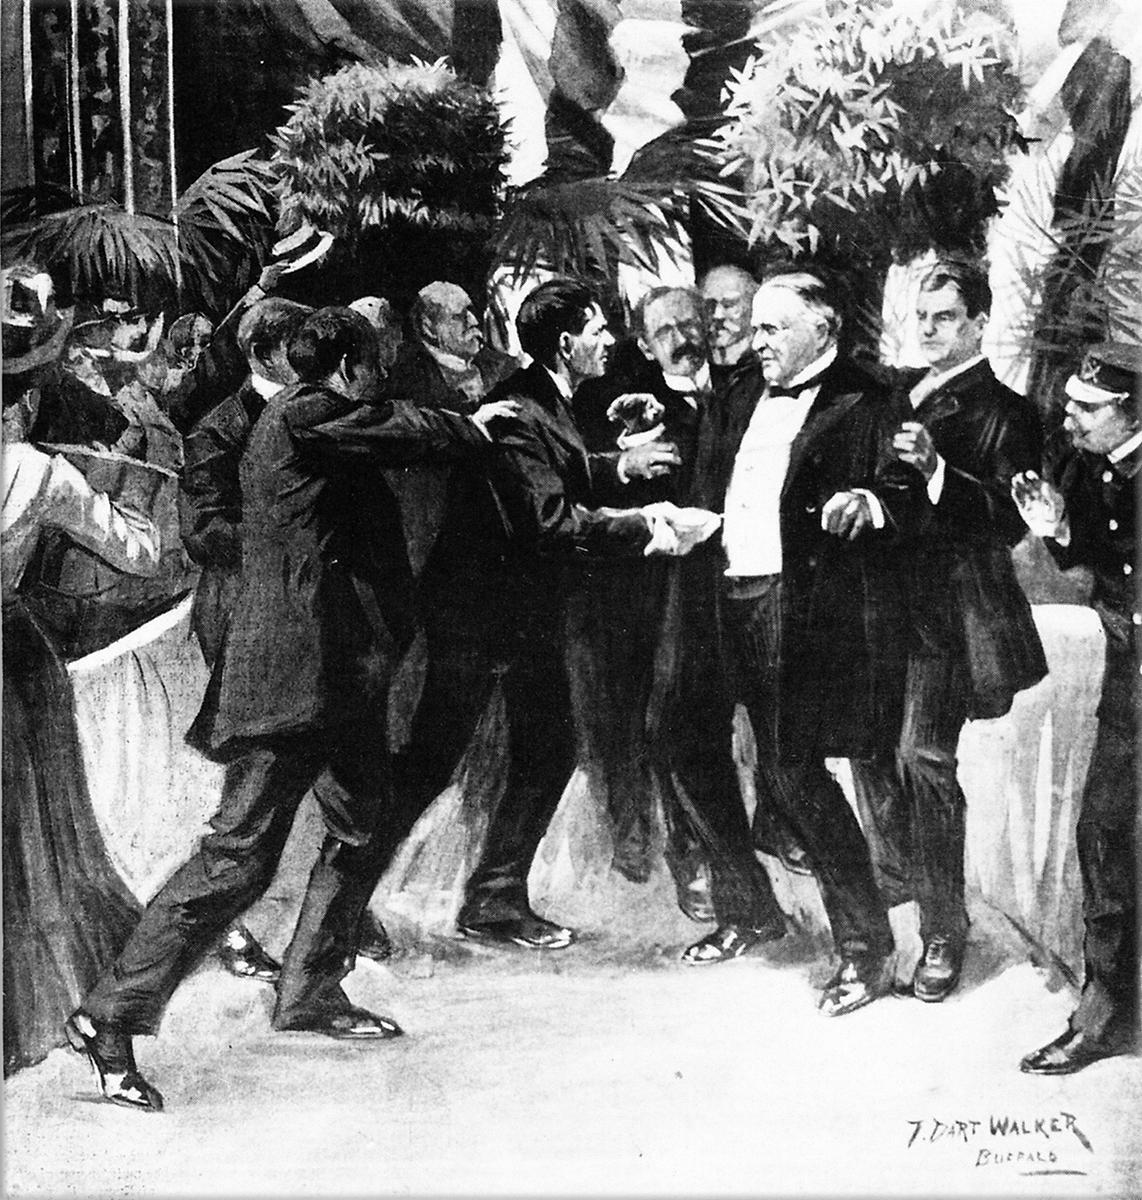 Anarchist Leon Czolgosz shoots and fatally wounds US President William McKinley at the Pan-American Exposition in Buffalo, New York